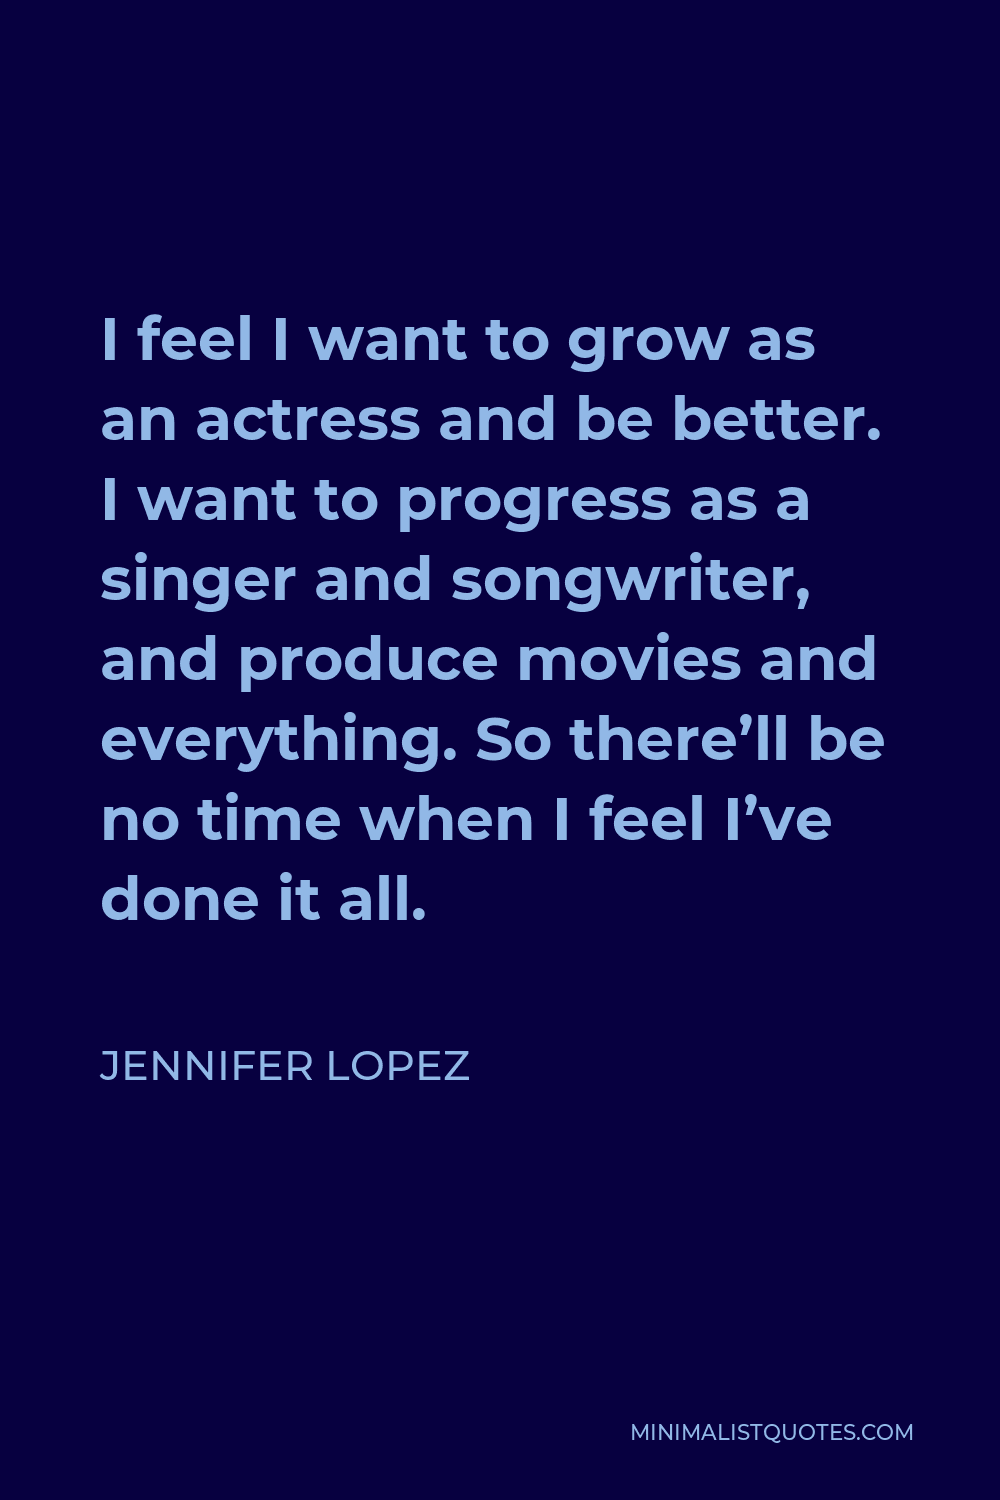 Jennifer Lopez Quote - I feel I want to grow as an actress and be better. I want to progress as a singer and songwriter, and produce movies and everything. So there’ll be no time when I feel I’ve done it all.